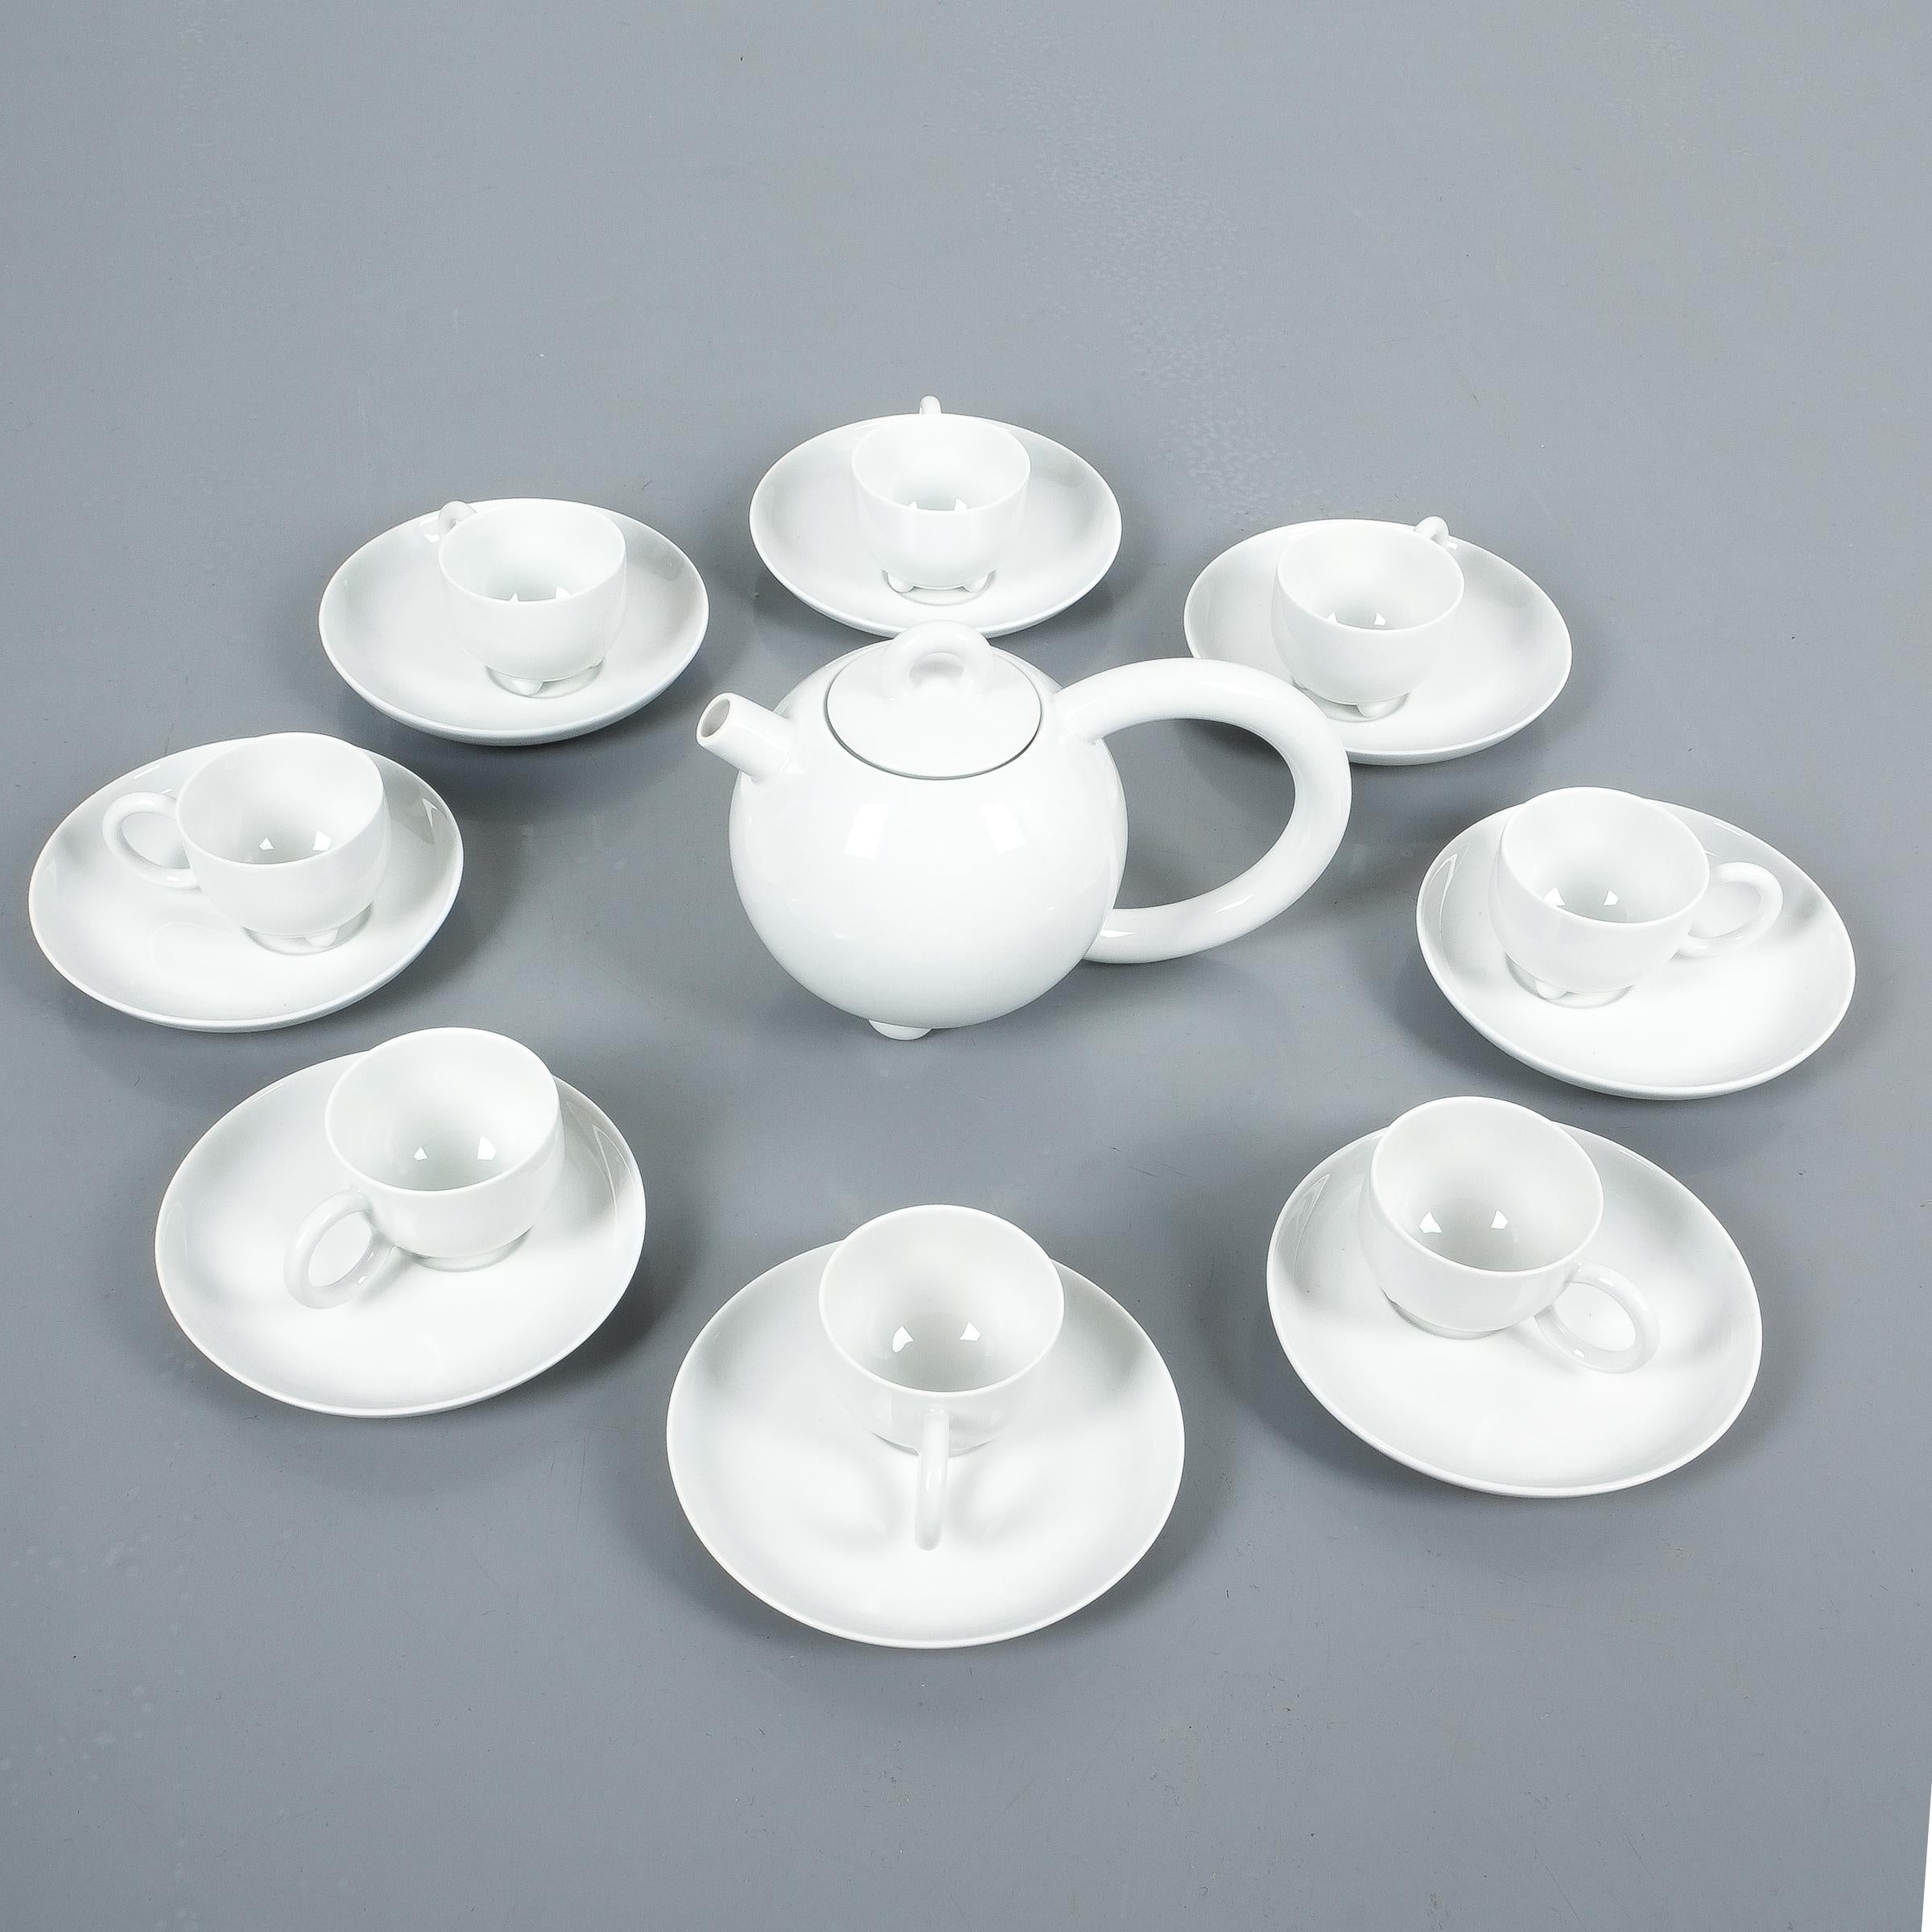 Matteo Thun Fantasia Mocca or tea set porcelain for Arzberg, 1980s. Immaculate set containing one tea pot with lid, eight cups with saucers, a milk vessel and a sugar container with lid, marked. We do have an identical set available without the milk